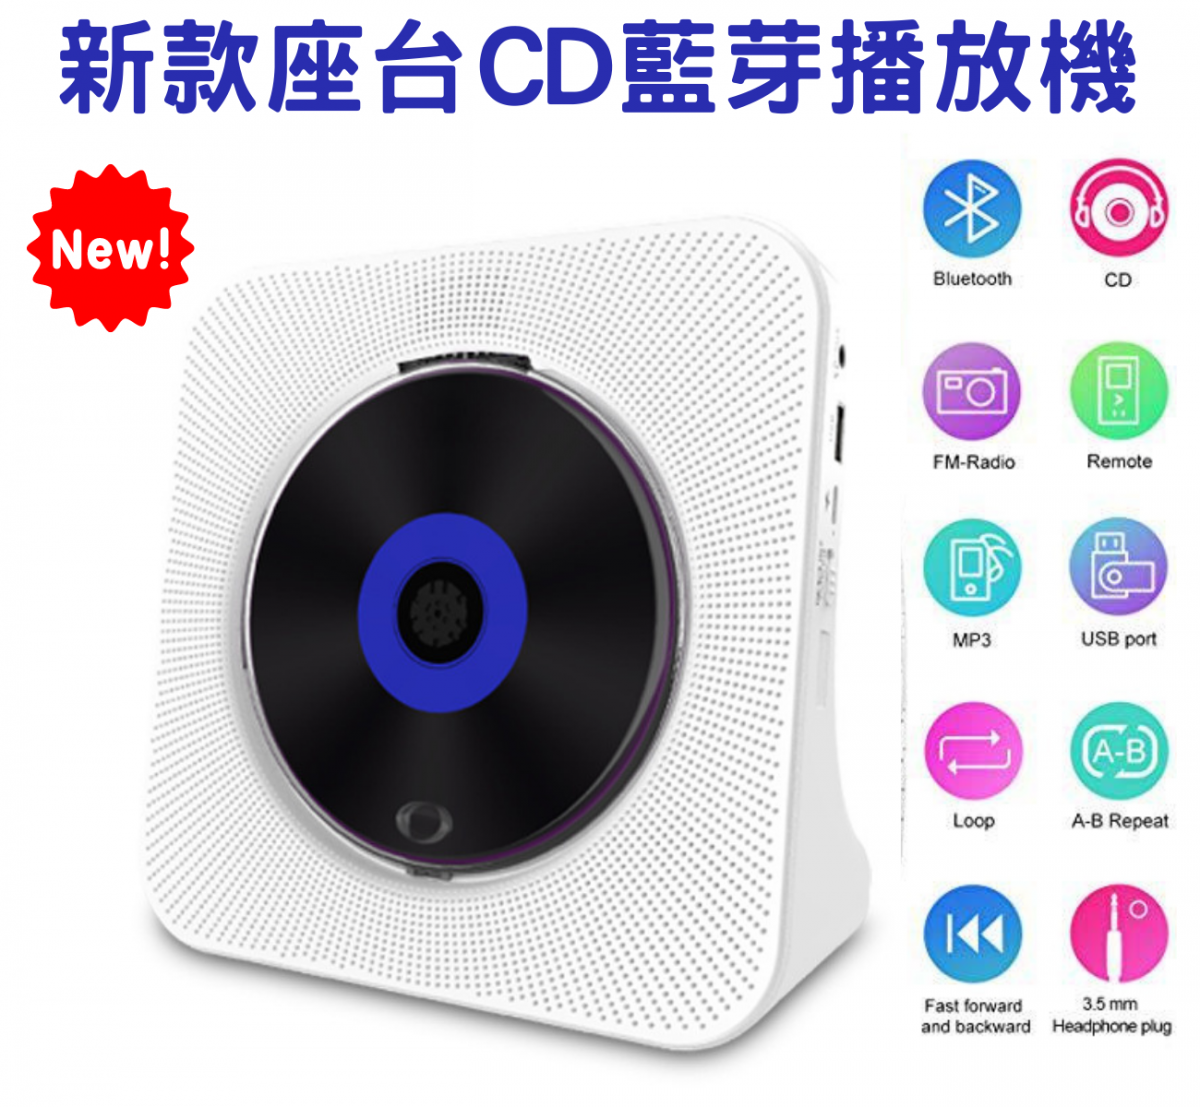 【01 White】 (NEW) Portable Desk Stand Bluetooth CD Player, FM Radio MP3 Music Speaker comes with remote control